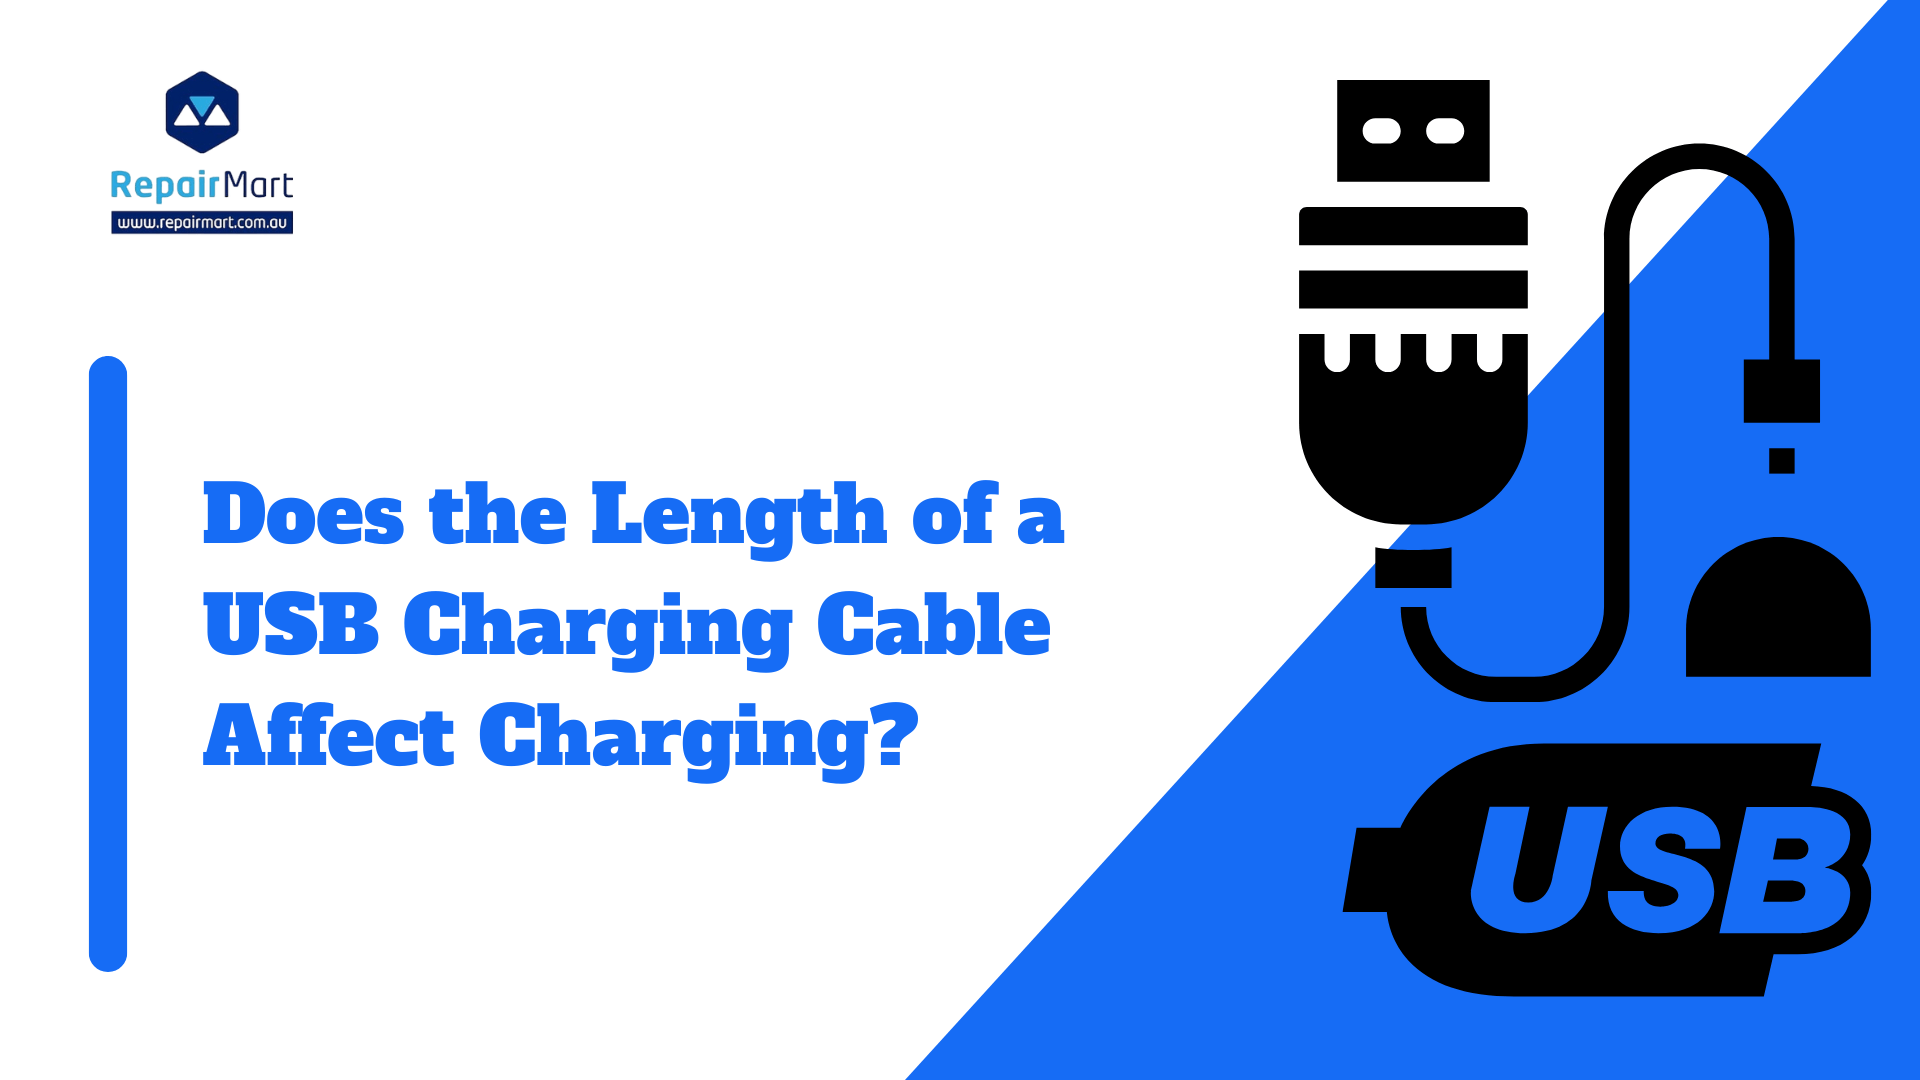 Does the Length of a USB Charging Cable Affect Charging